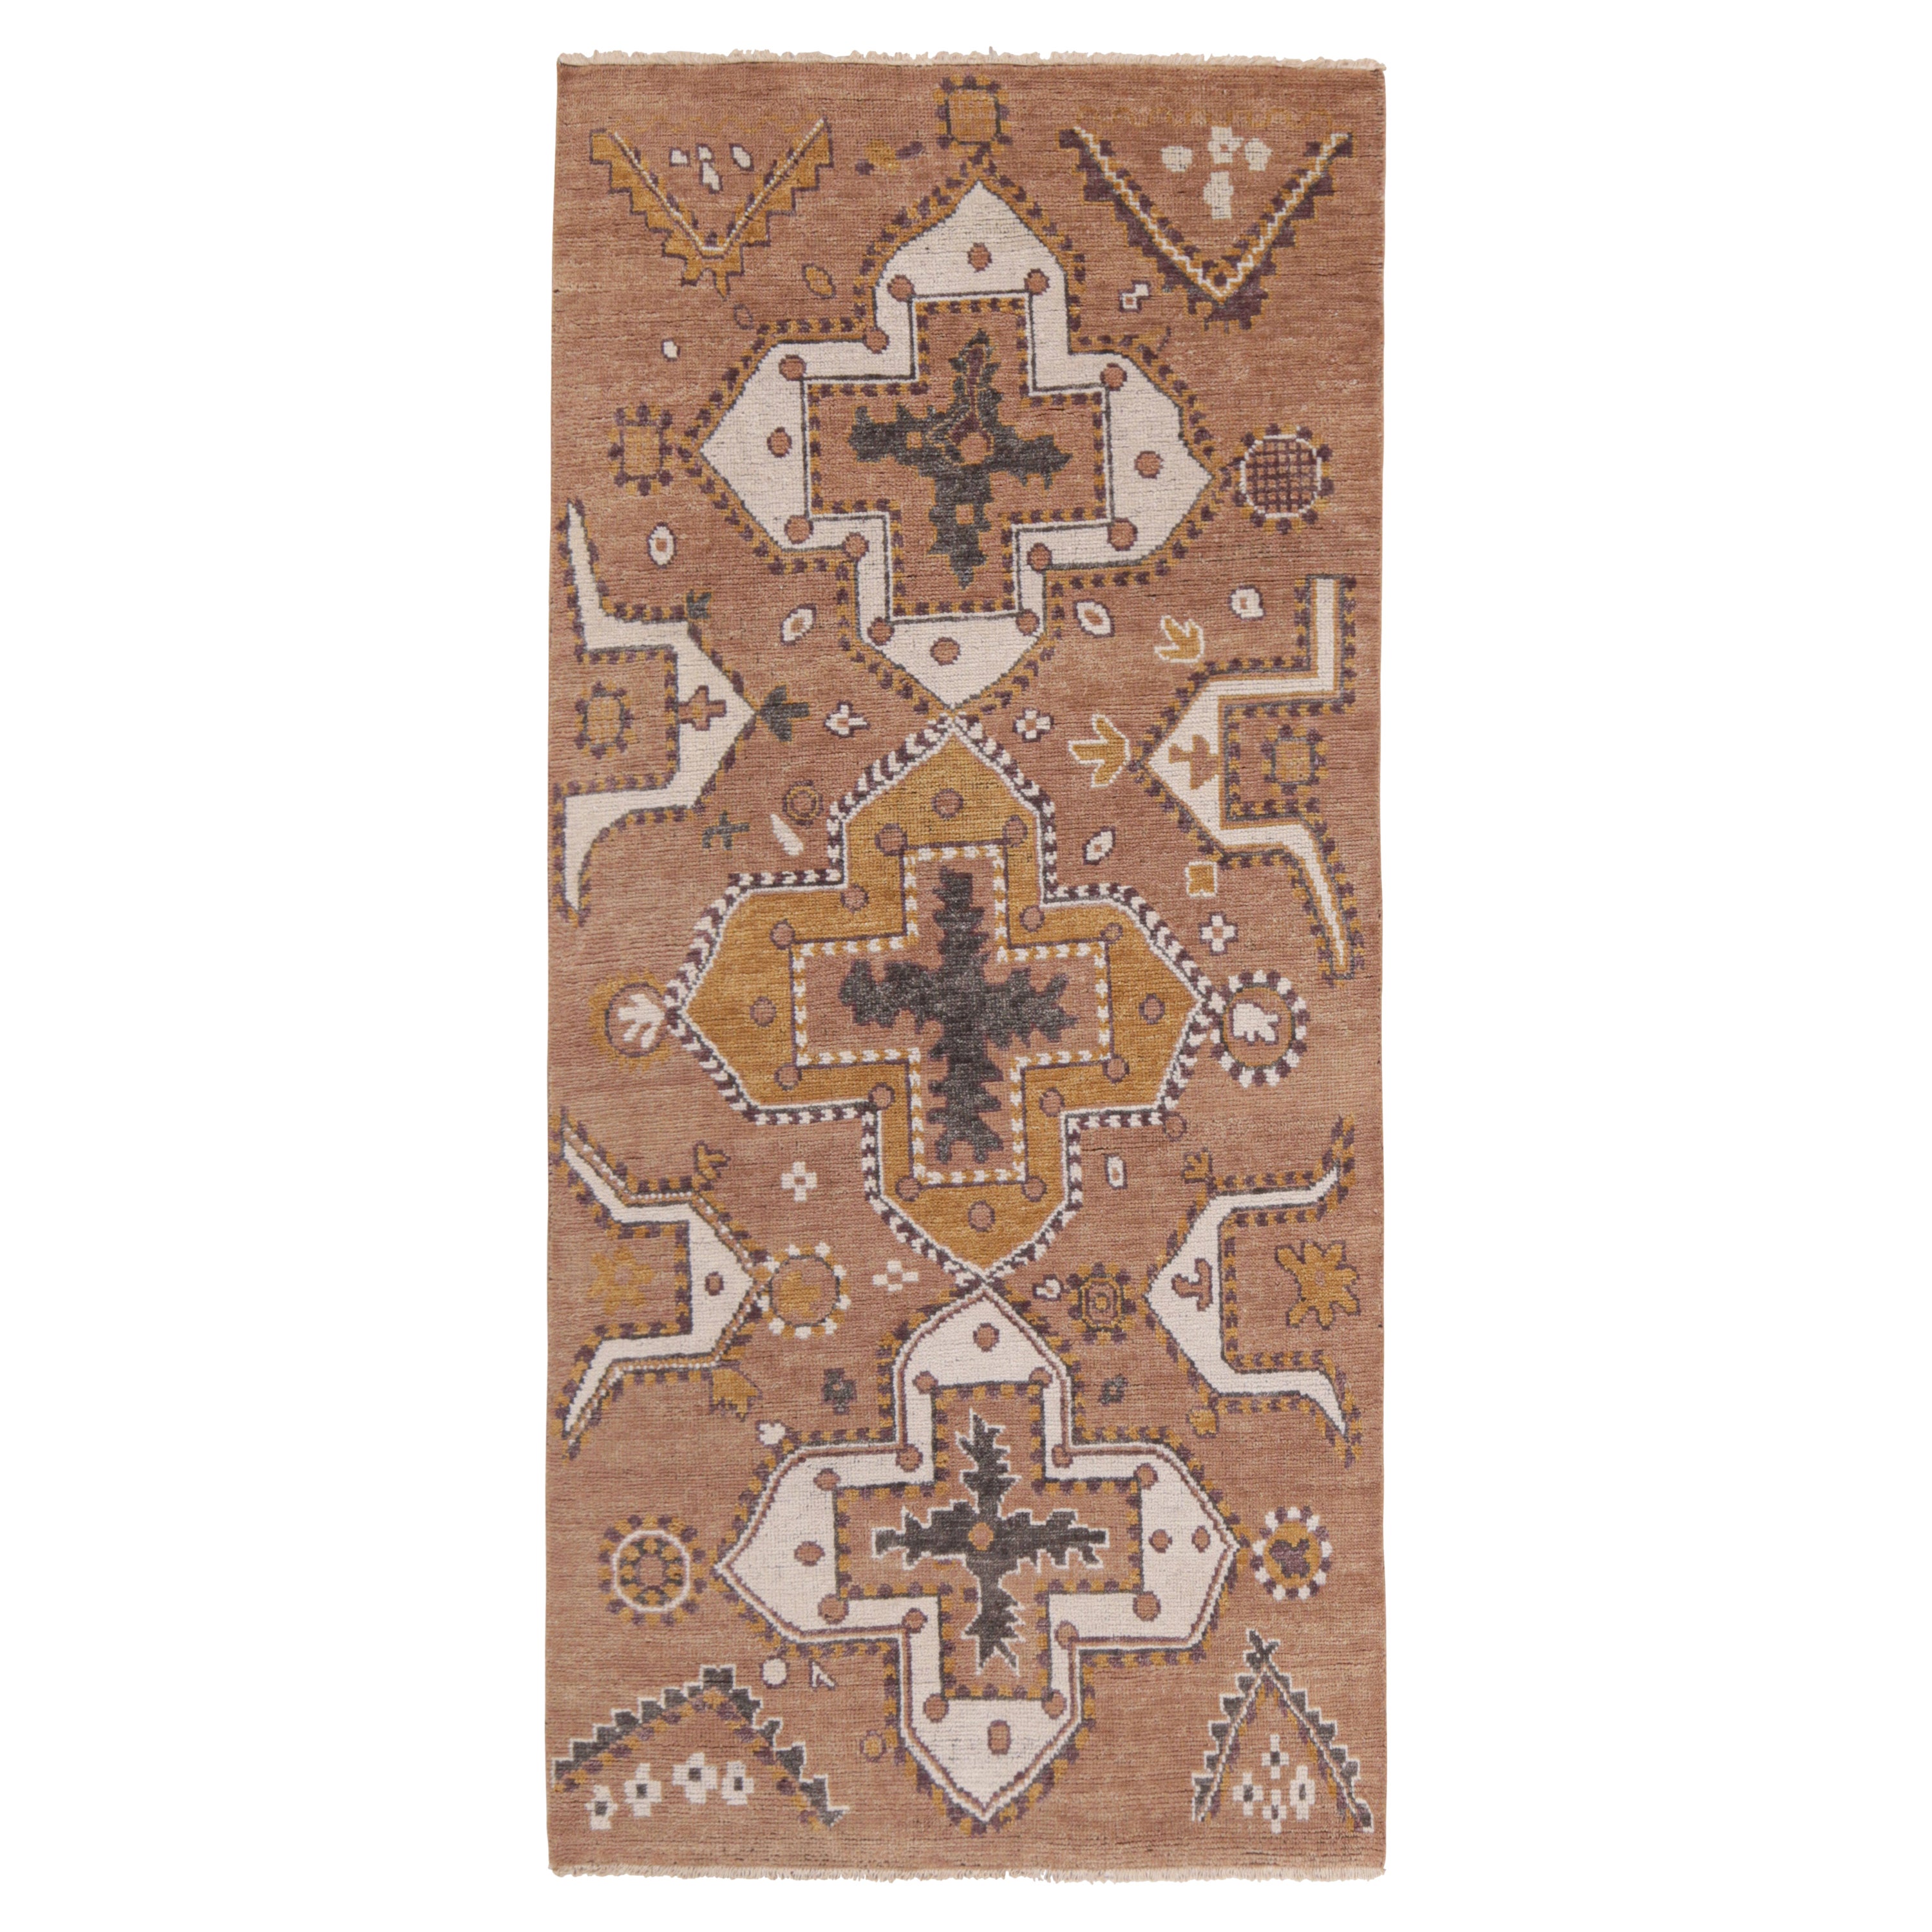 Rug & Kilim’s Tribal Style Rug in Rust with Gold and White Medallion Patterns